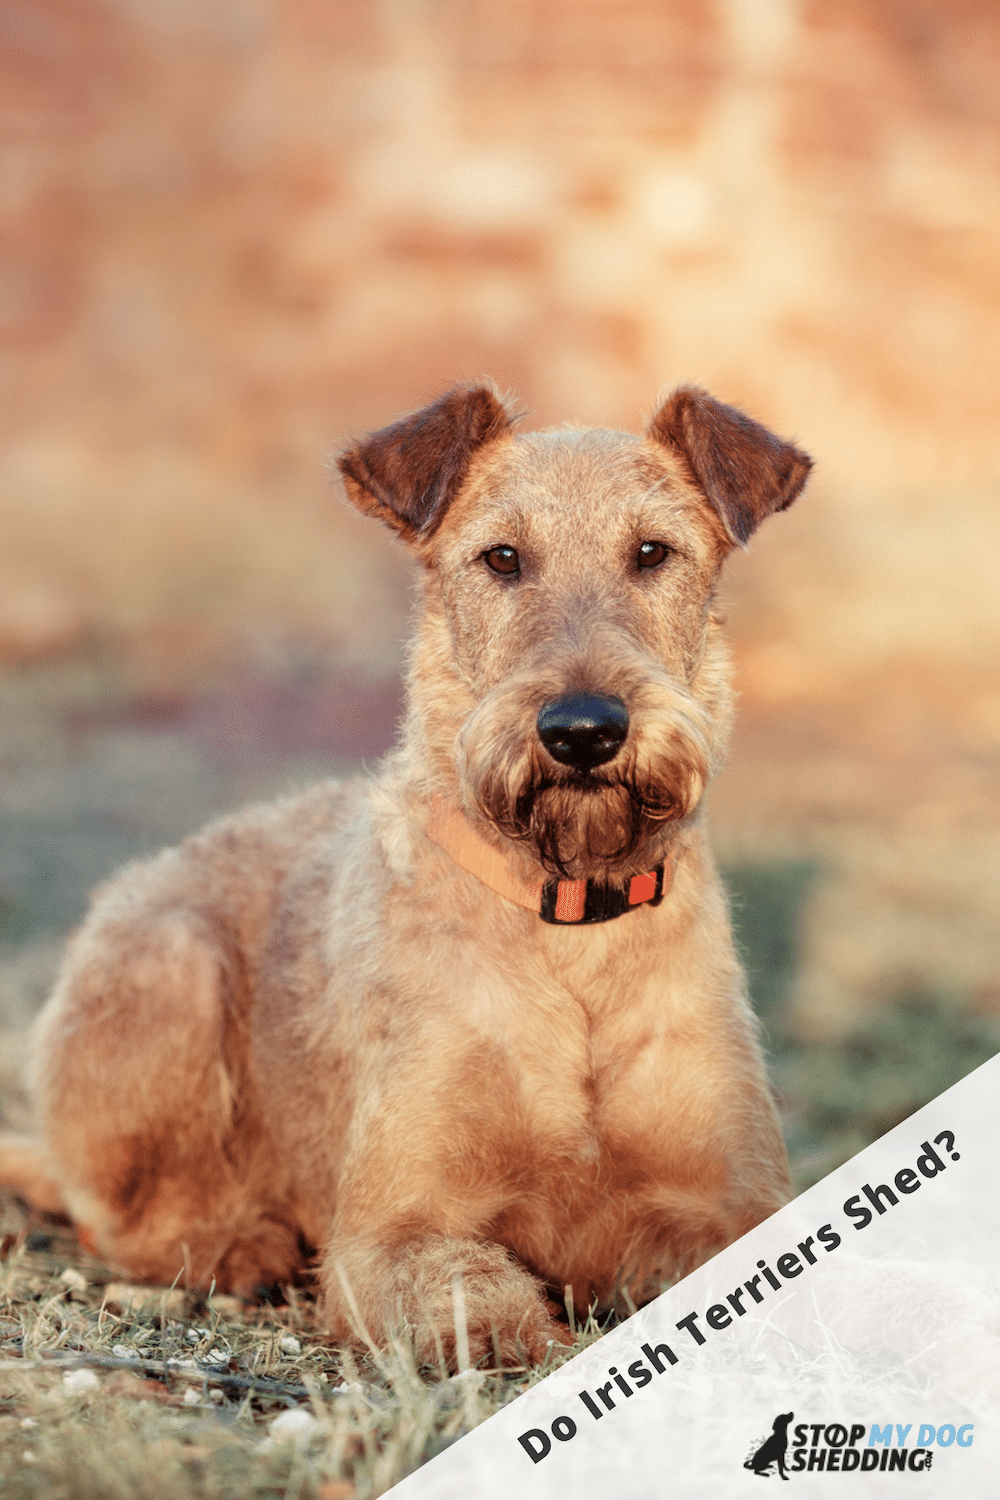 Irish Terrier Shedding (All You Need to Know)